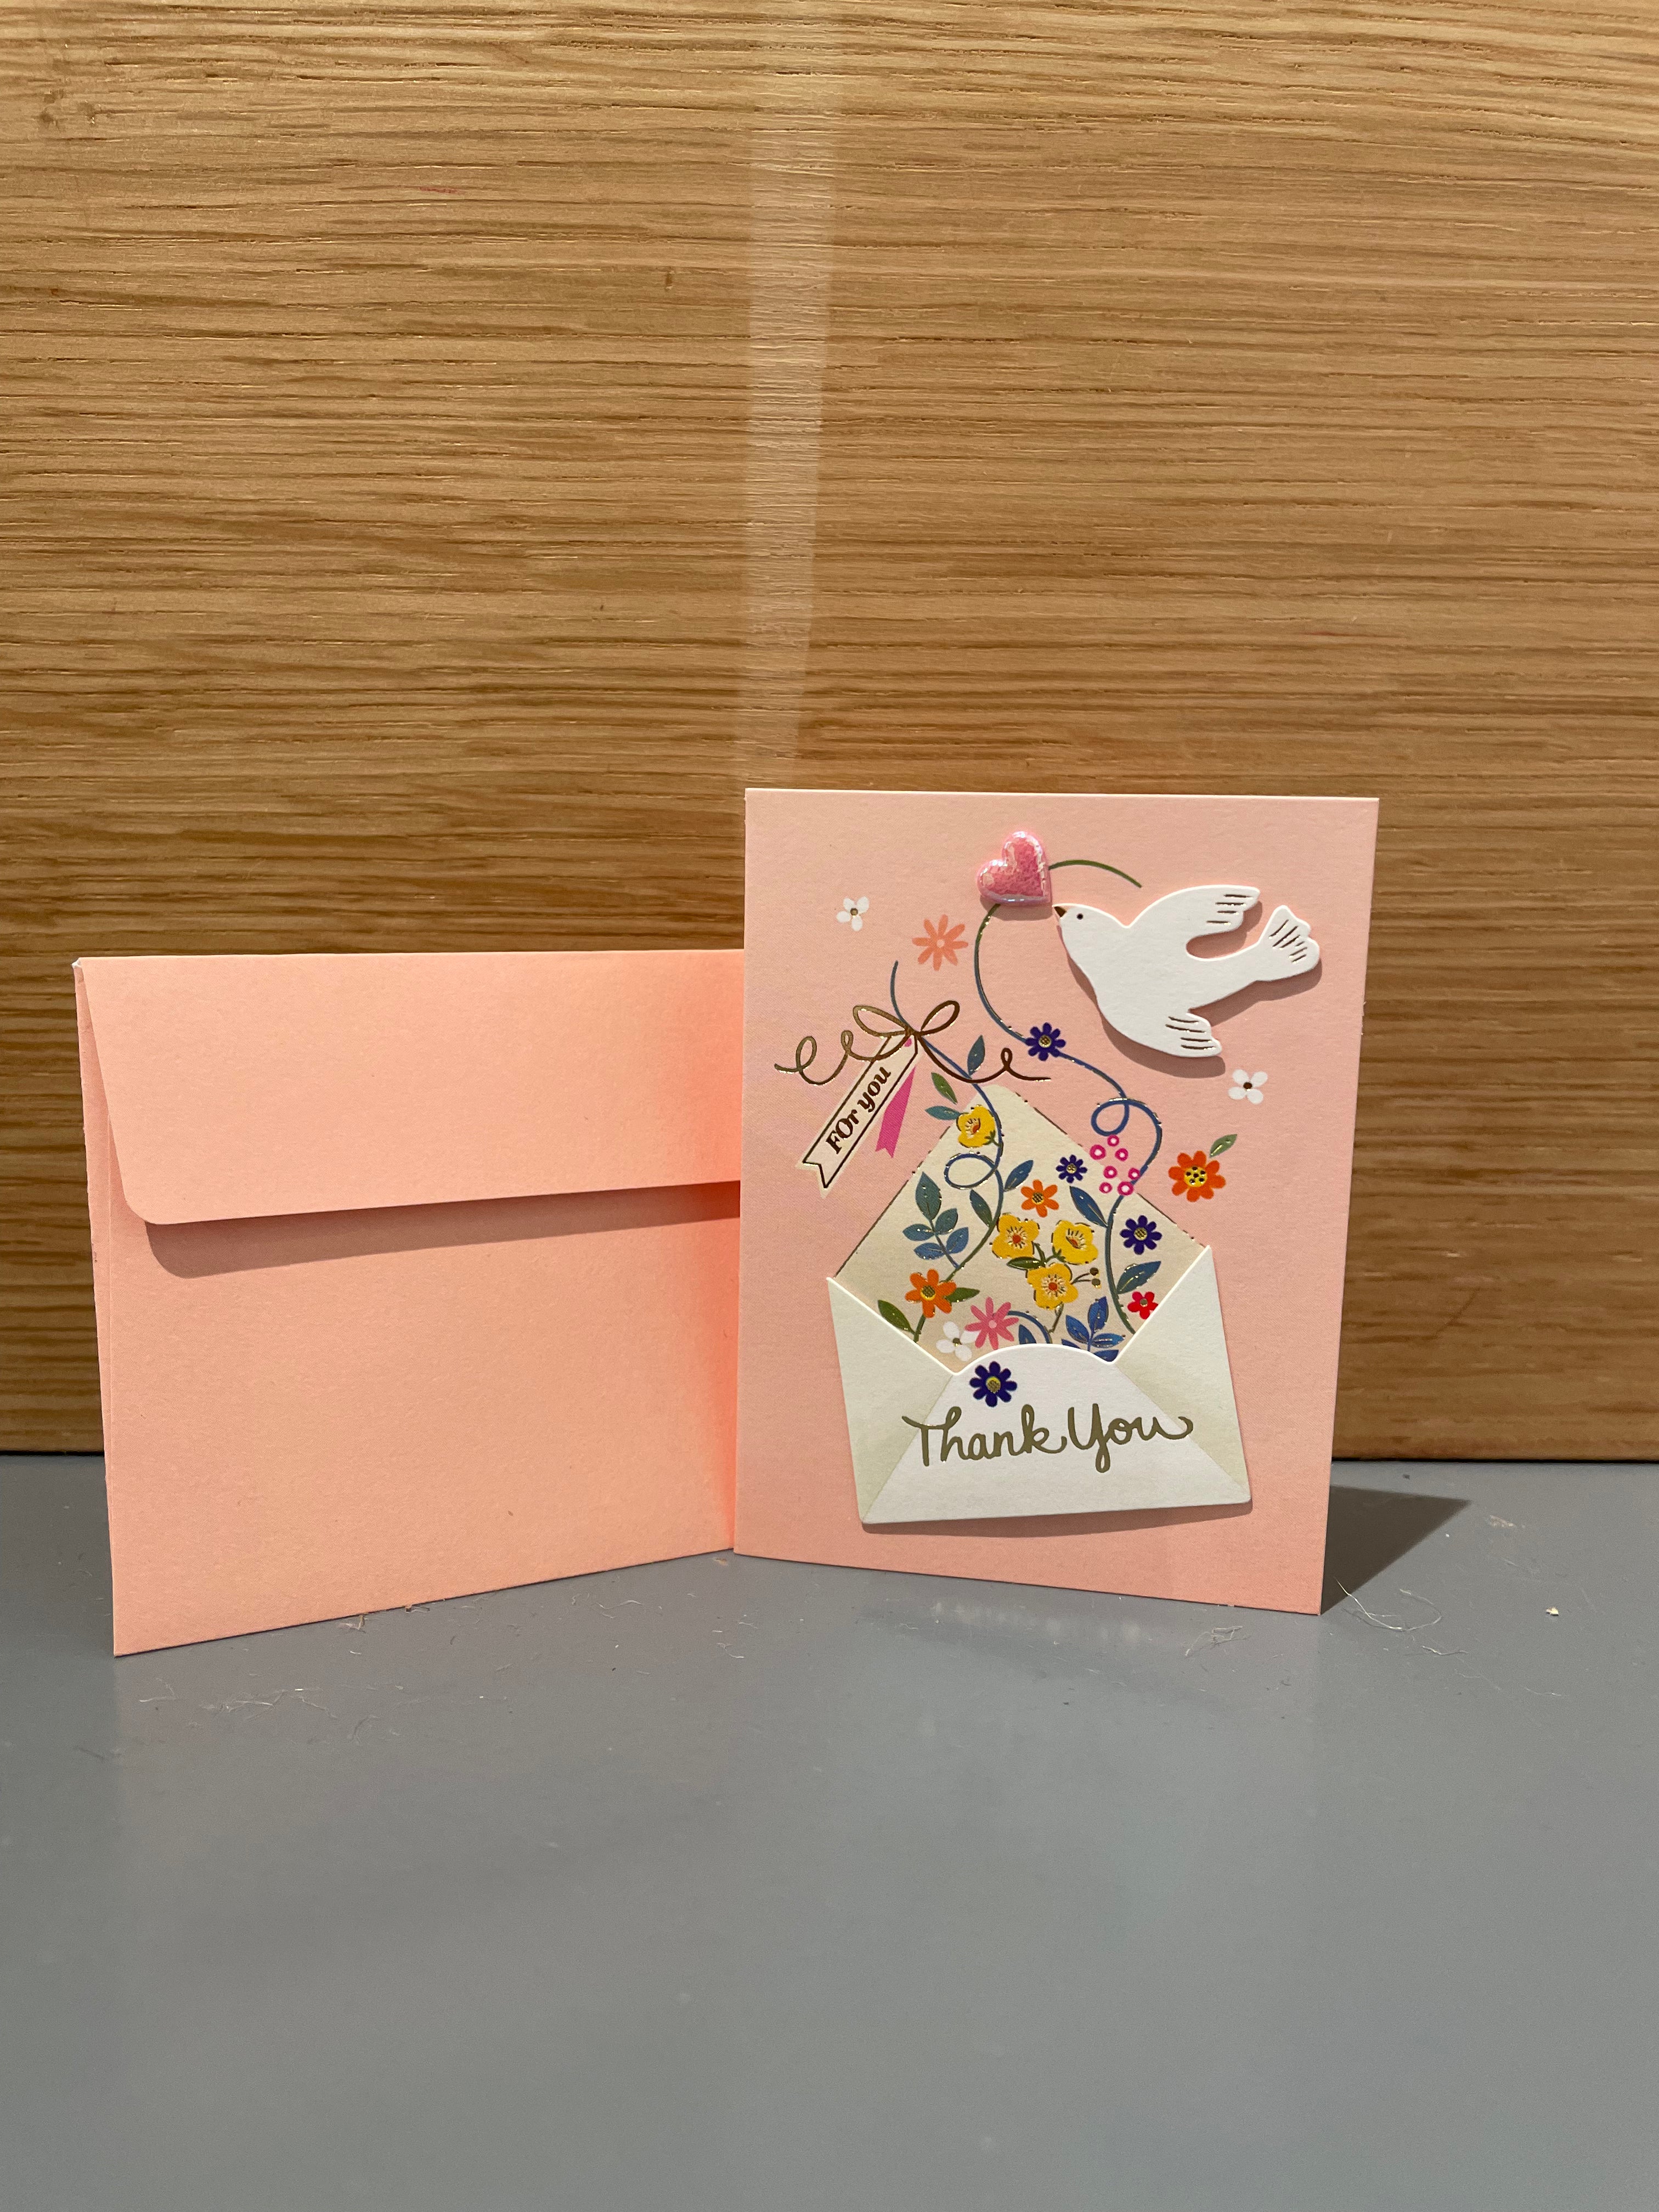 Japanese thank you card - envelope filled with flowers